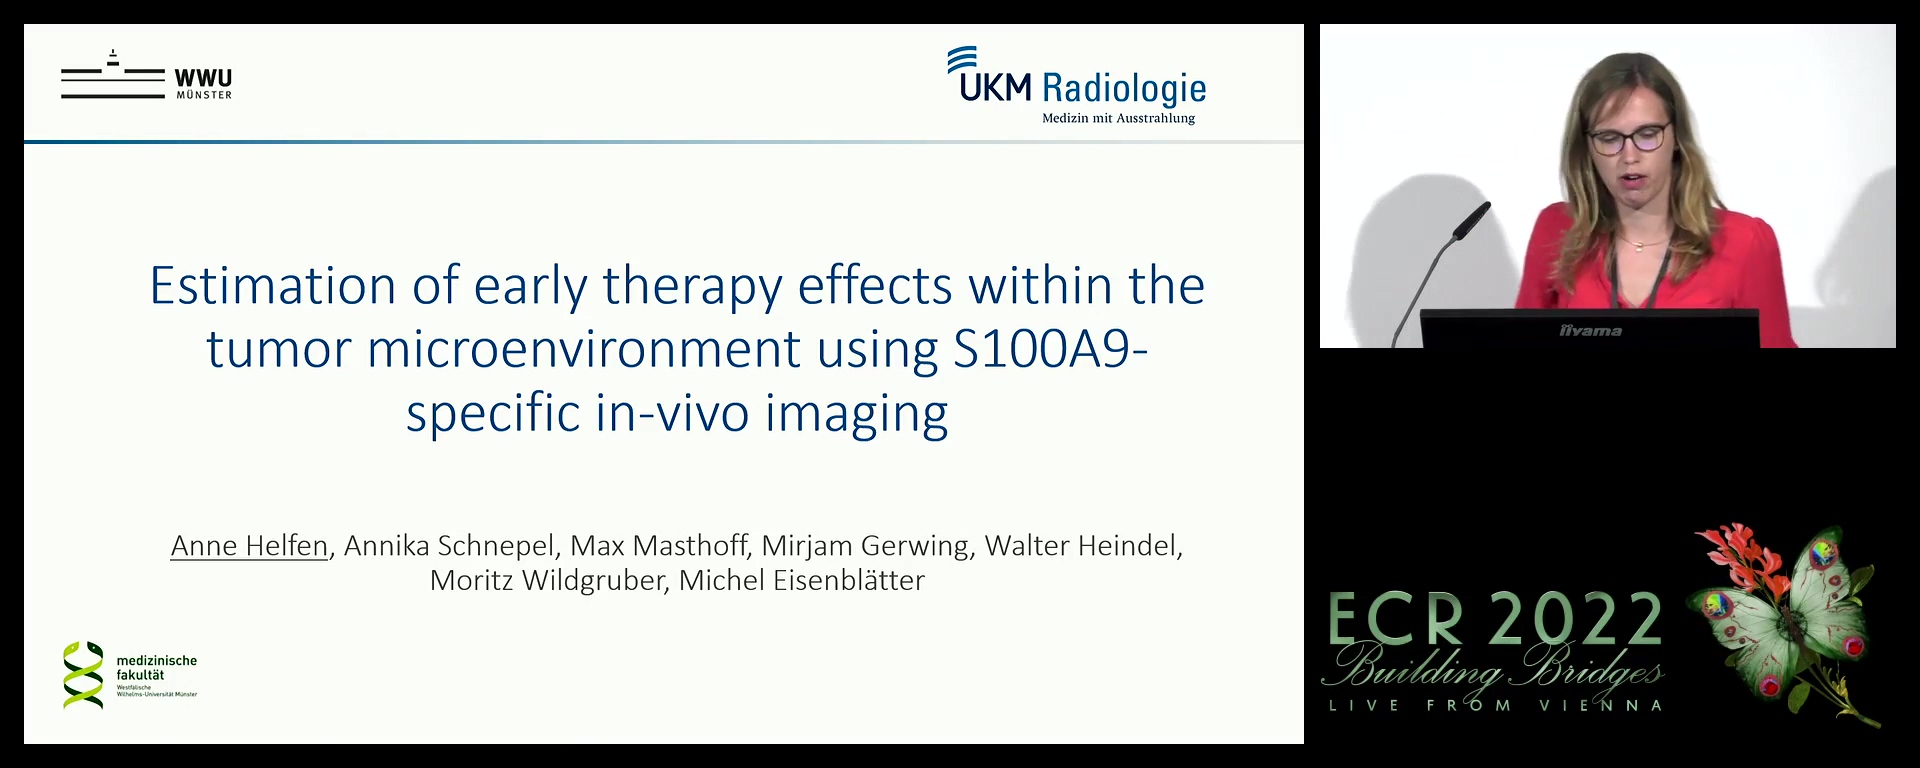 Estimation of early therapy effects within the tumour microenvironment using S100A9-specific in-vivo imaging - Anne Helfen, Münster / DE